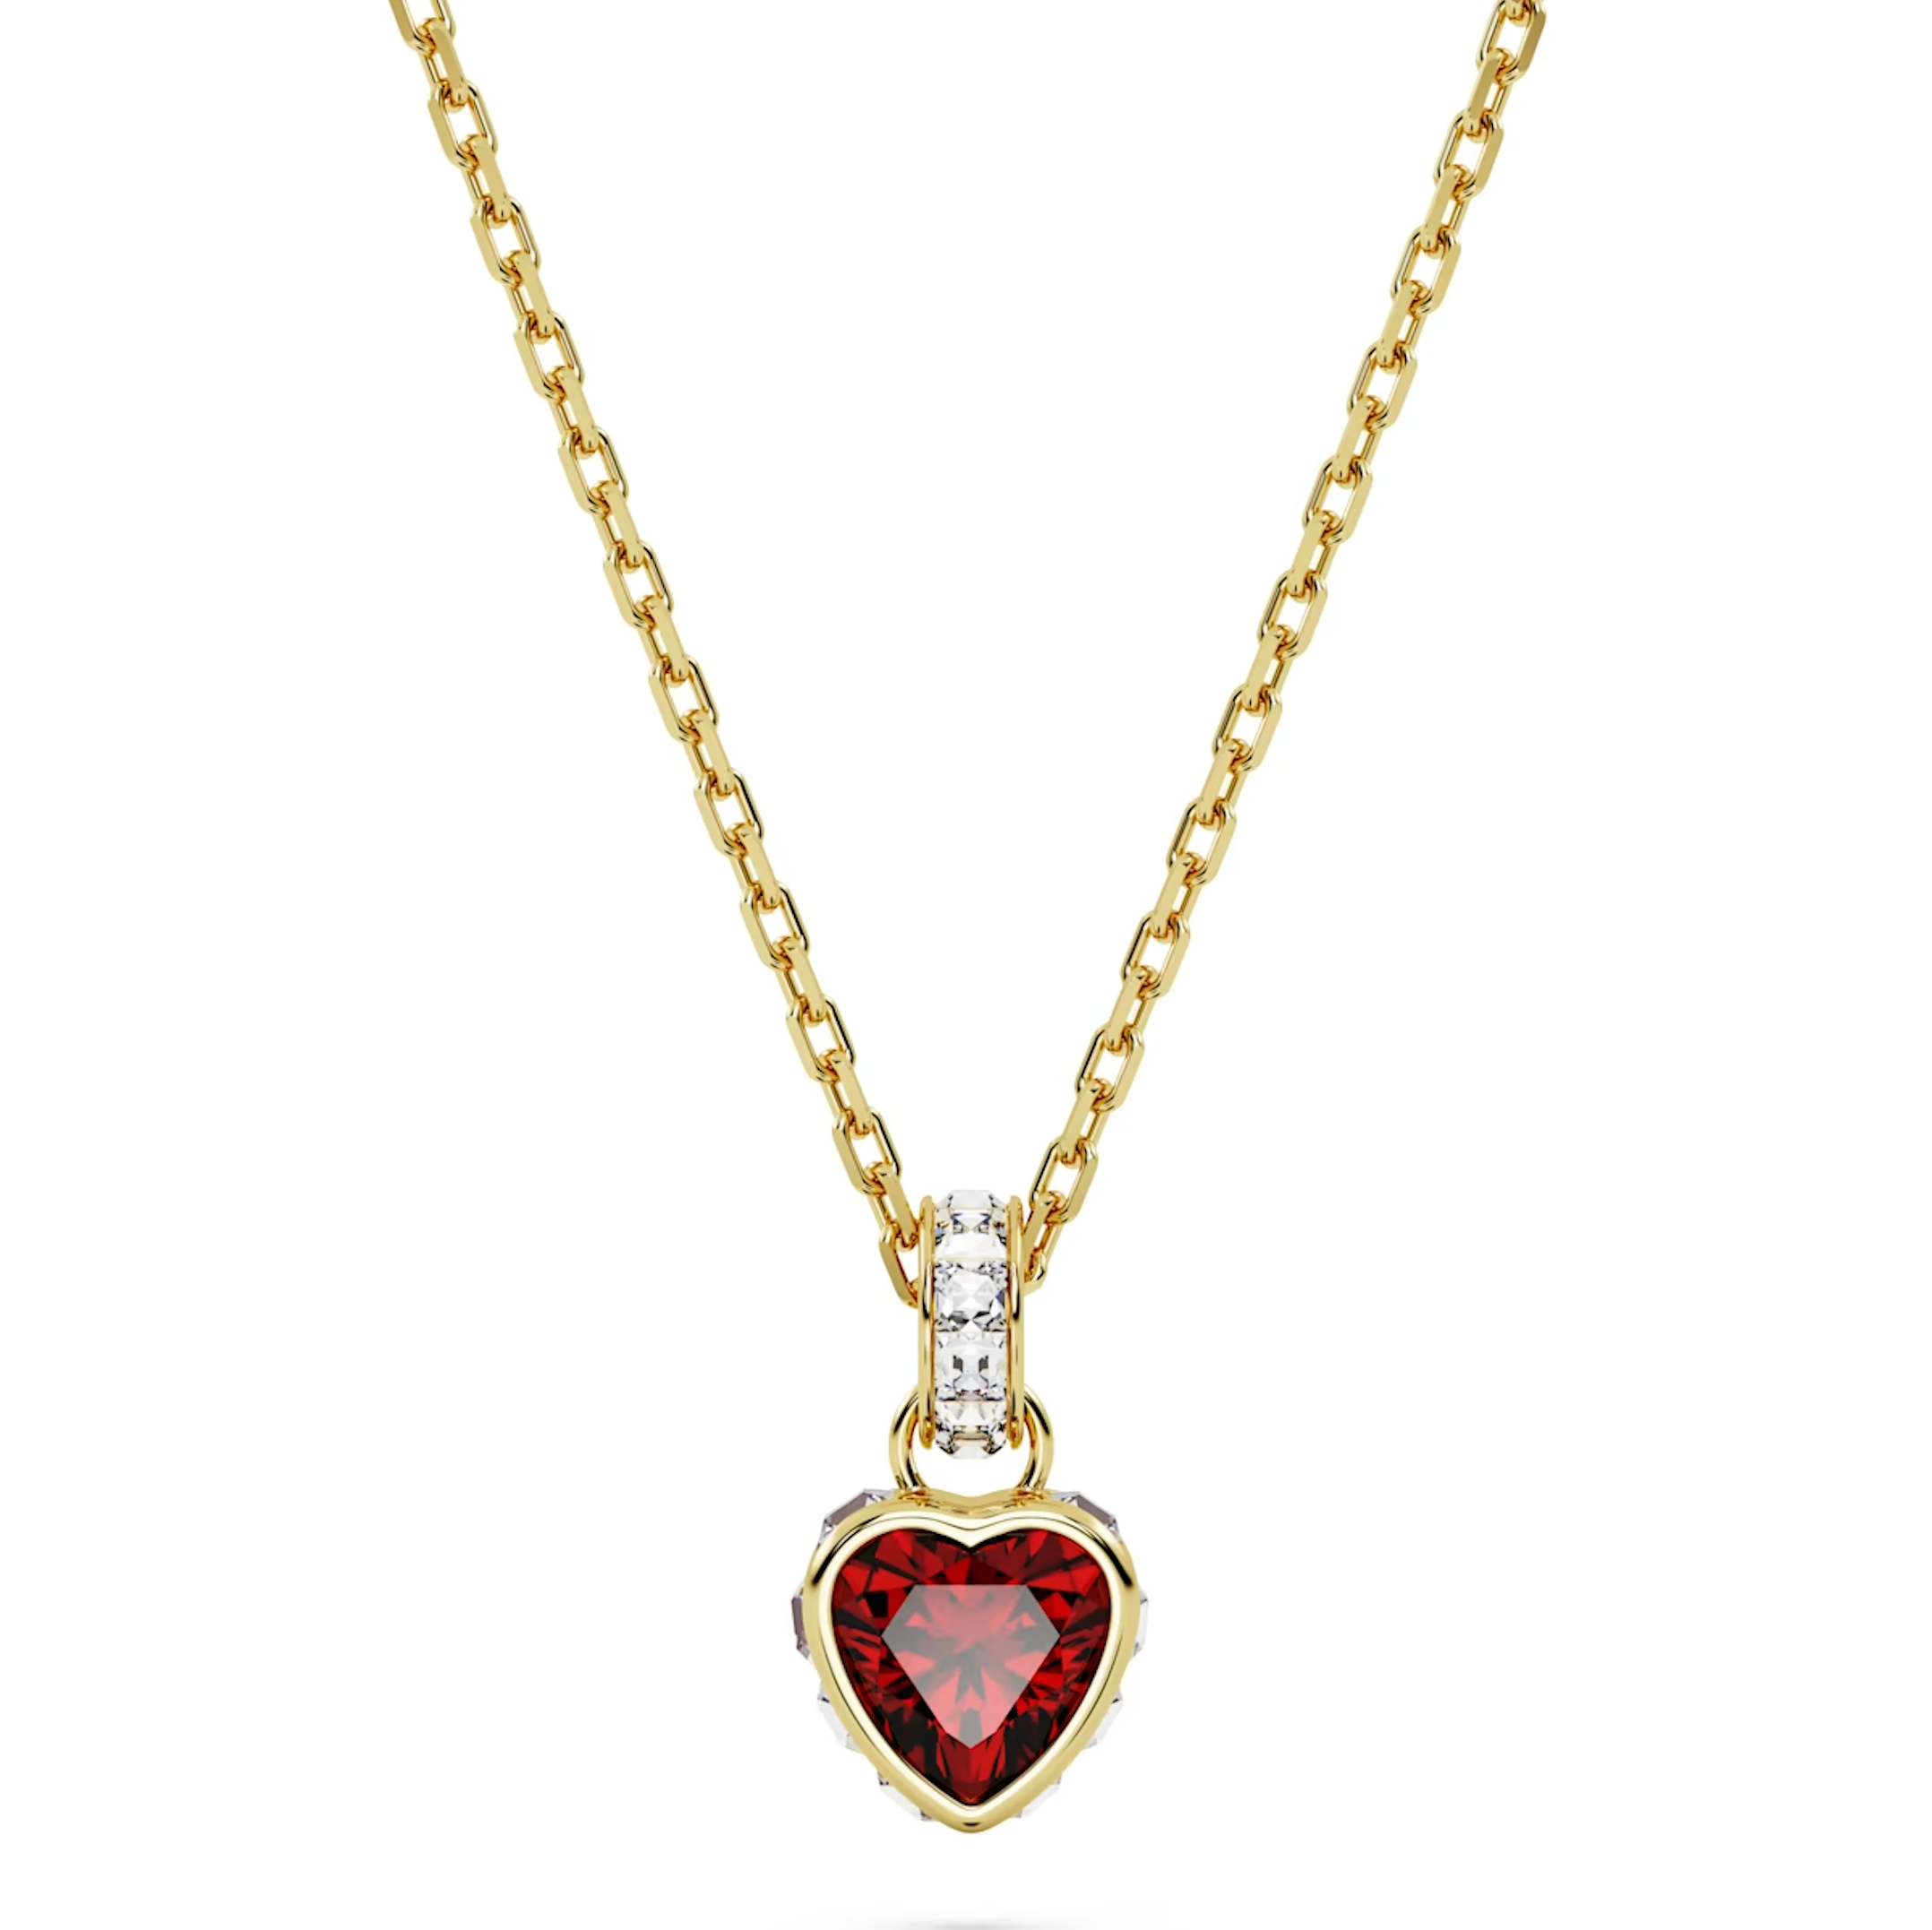 Swarovski Stilla Yellow Gold Tone Plated Heart Red Crystal Pendant Necklace